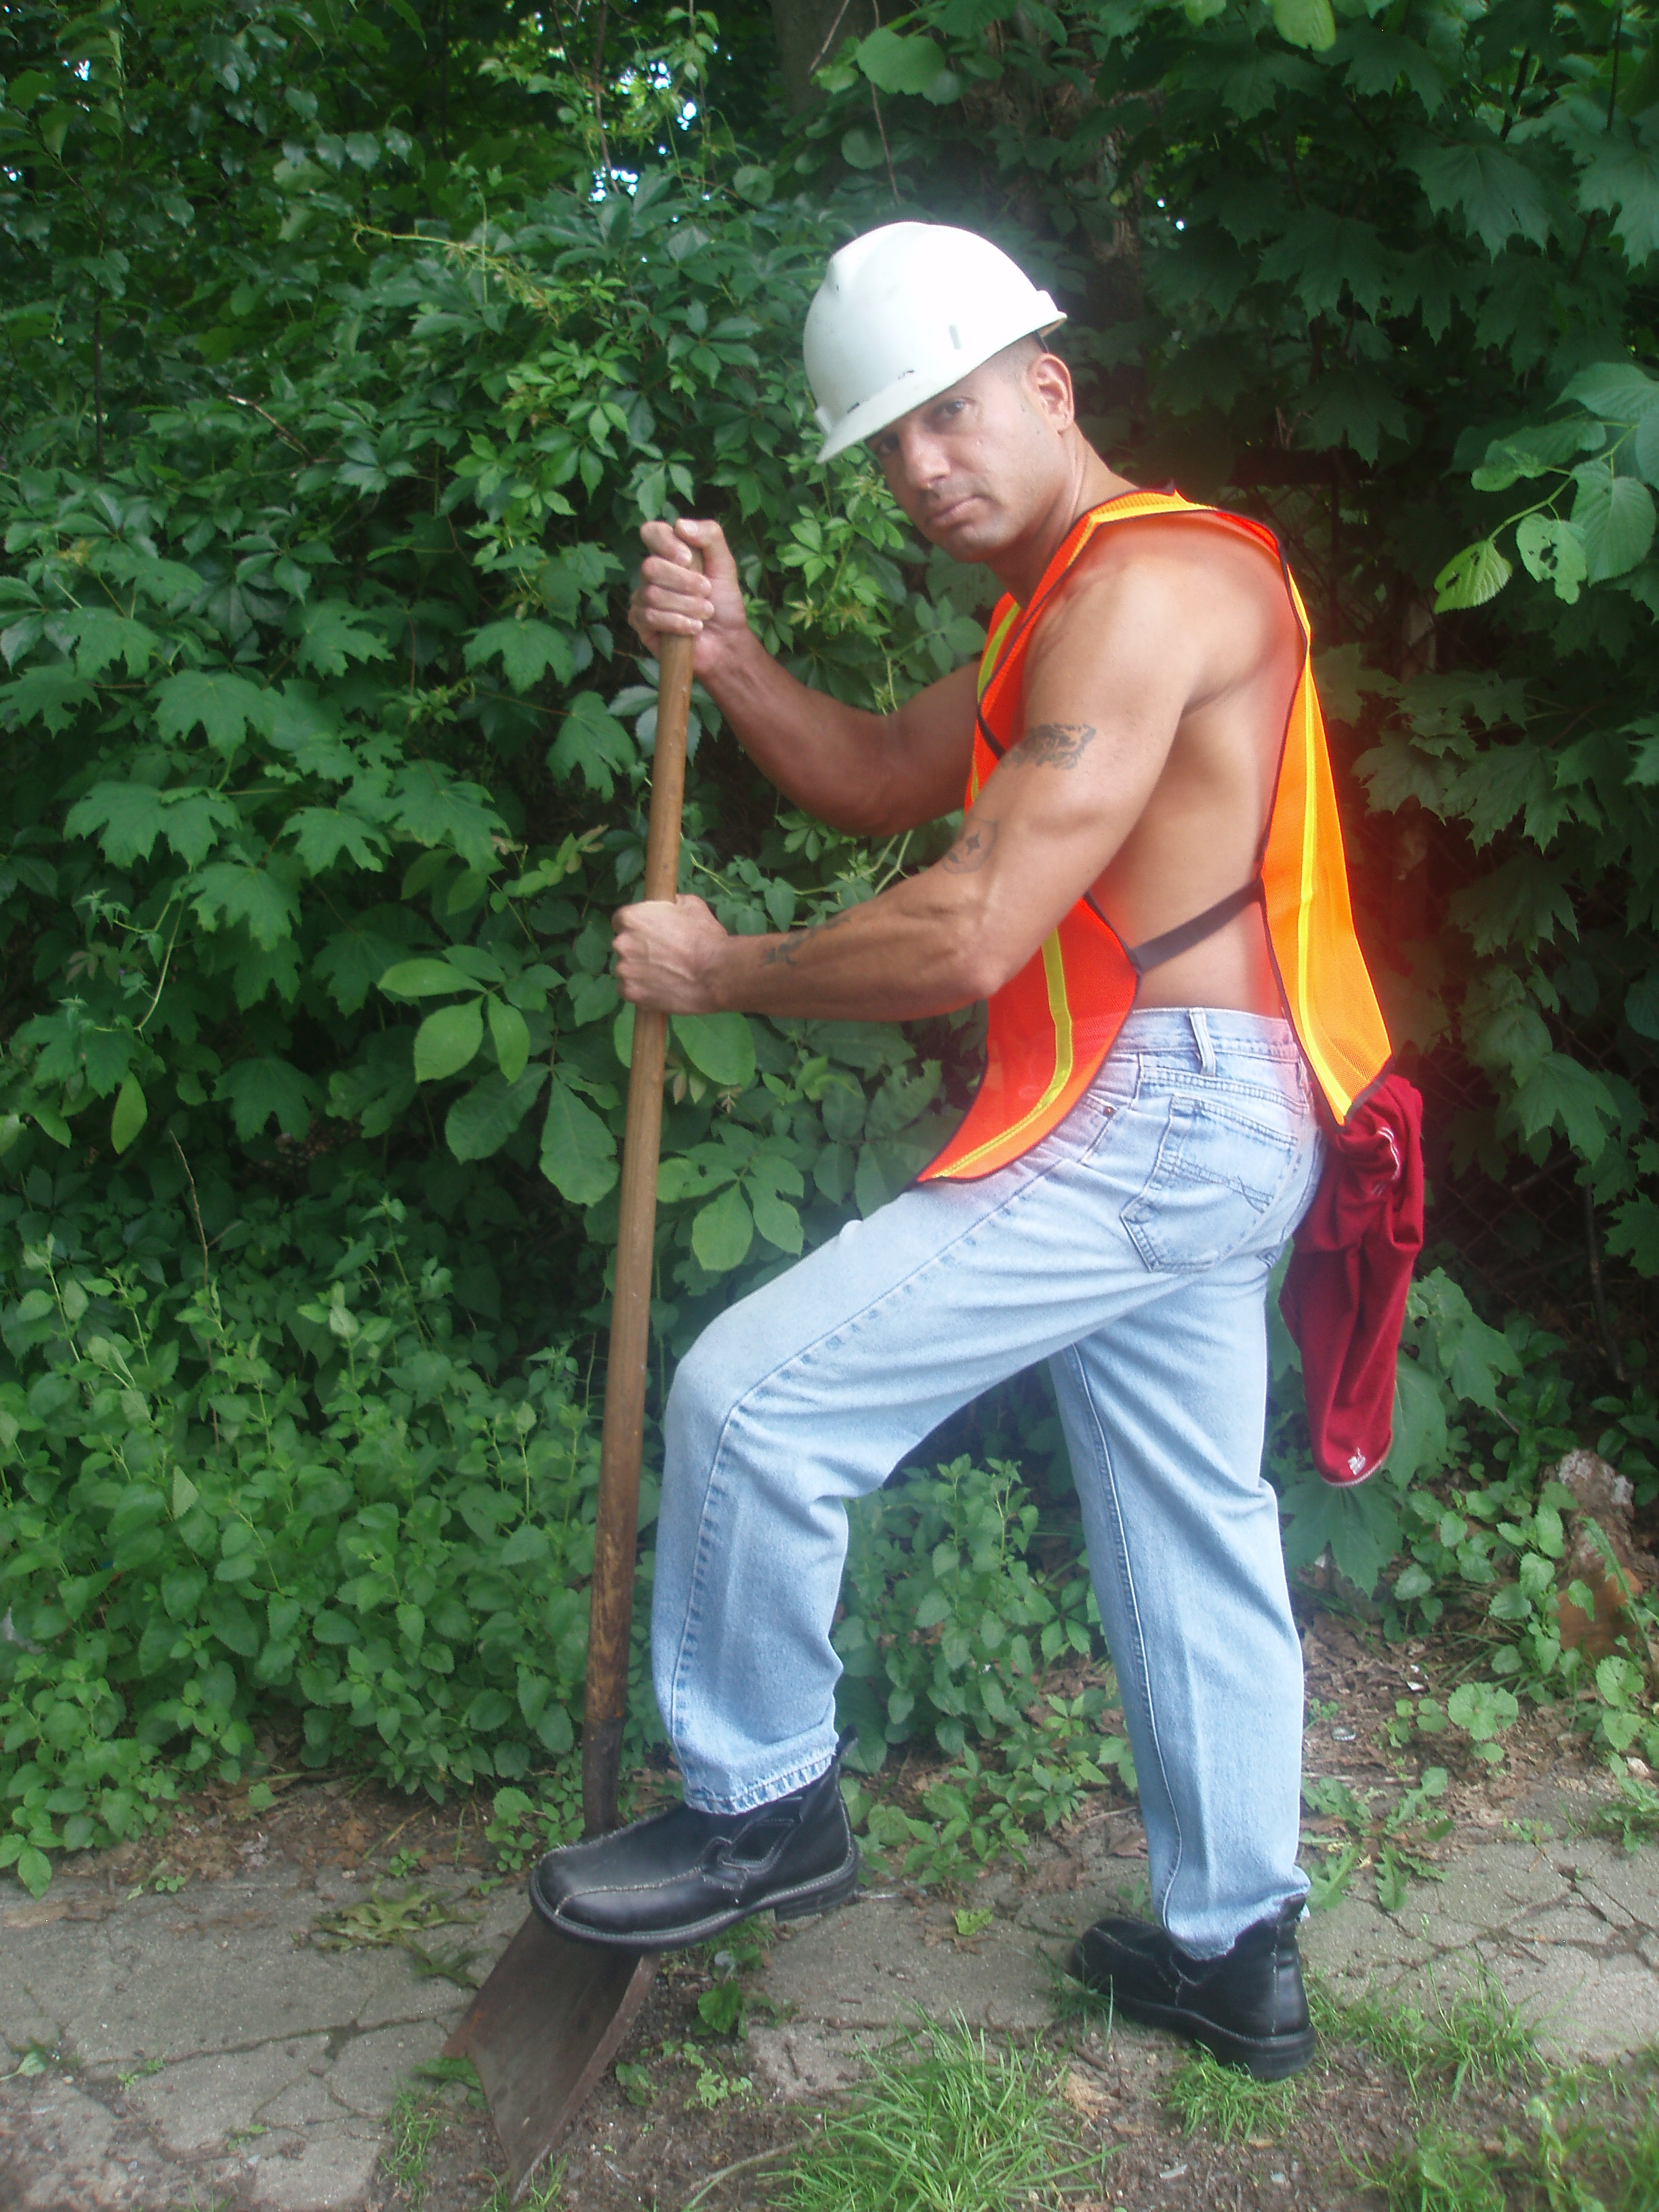 i have my own construction worker uniform